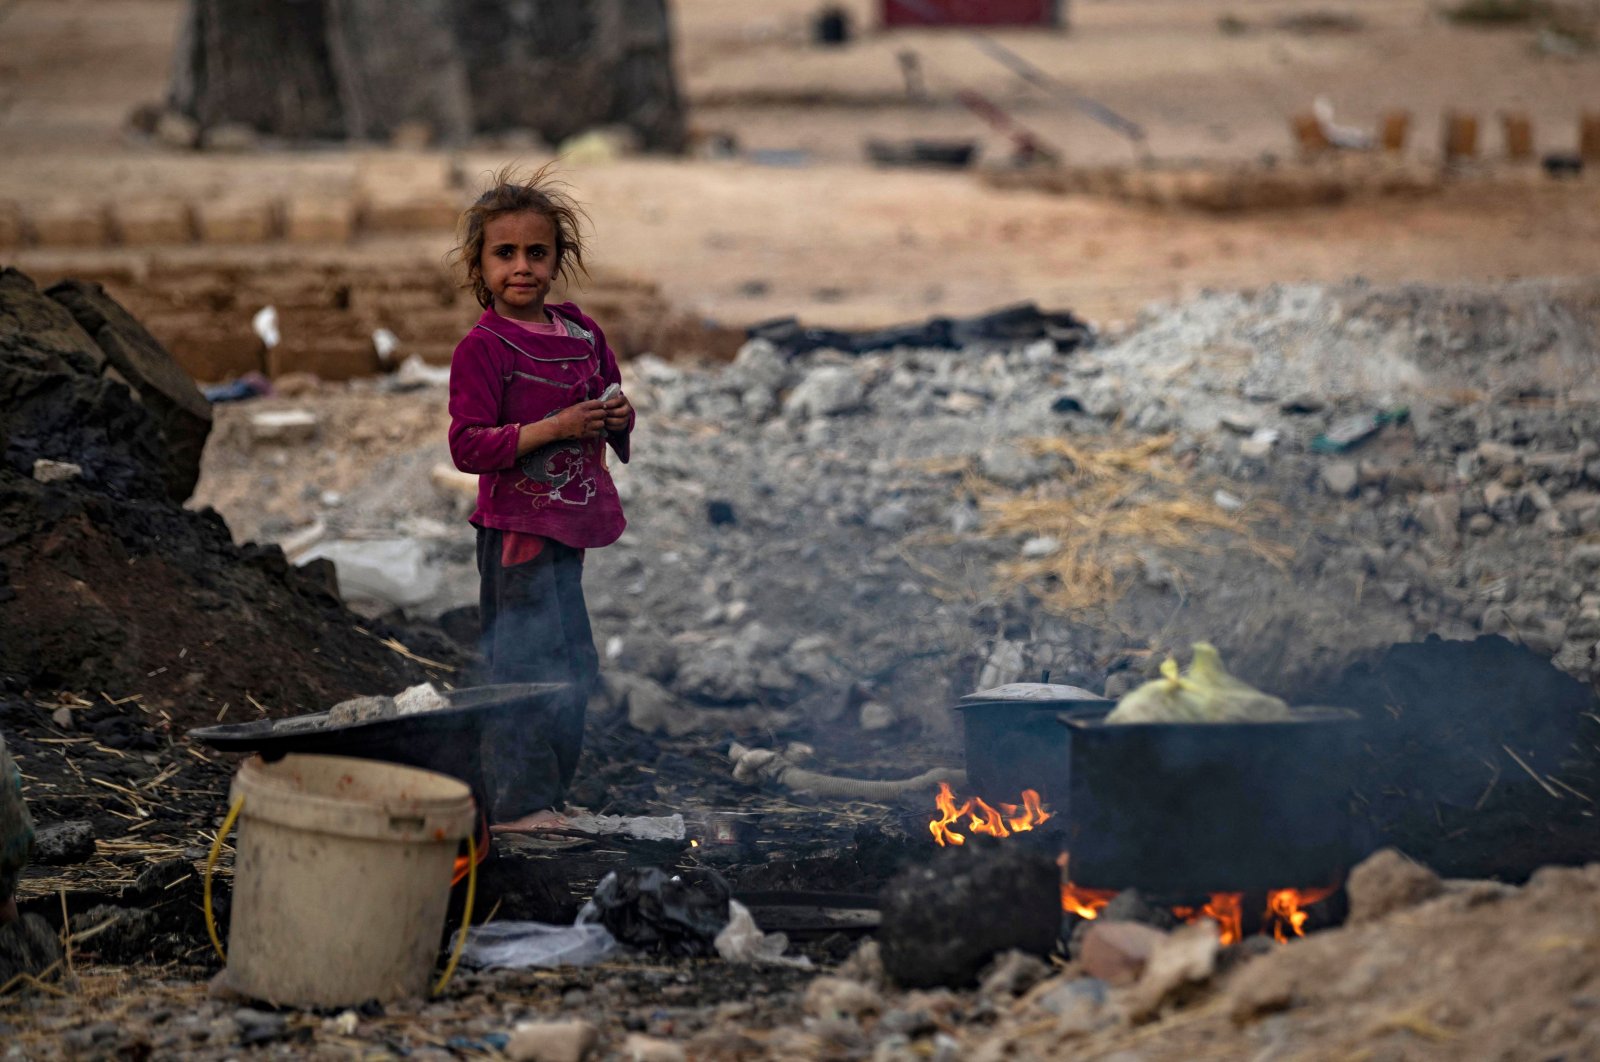 A Syrian girl stands near cooking pots placed on fire at the Sahlah al-Banat camp for displaced people in the countryside of Raqqa, northern Syria, Nov. 7, 2022. (AFP Photo)